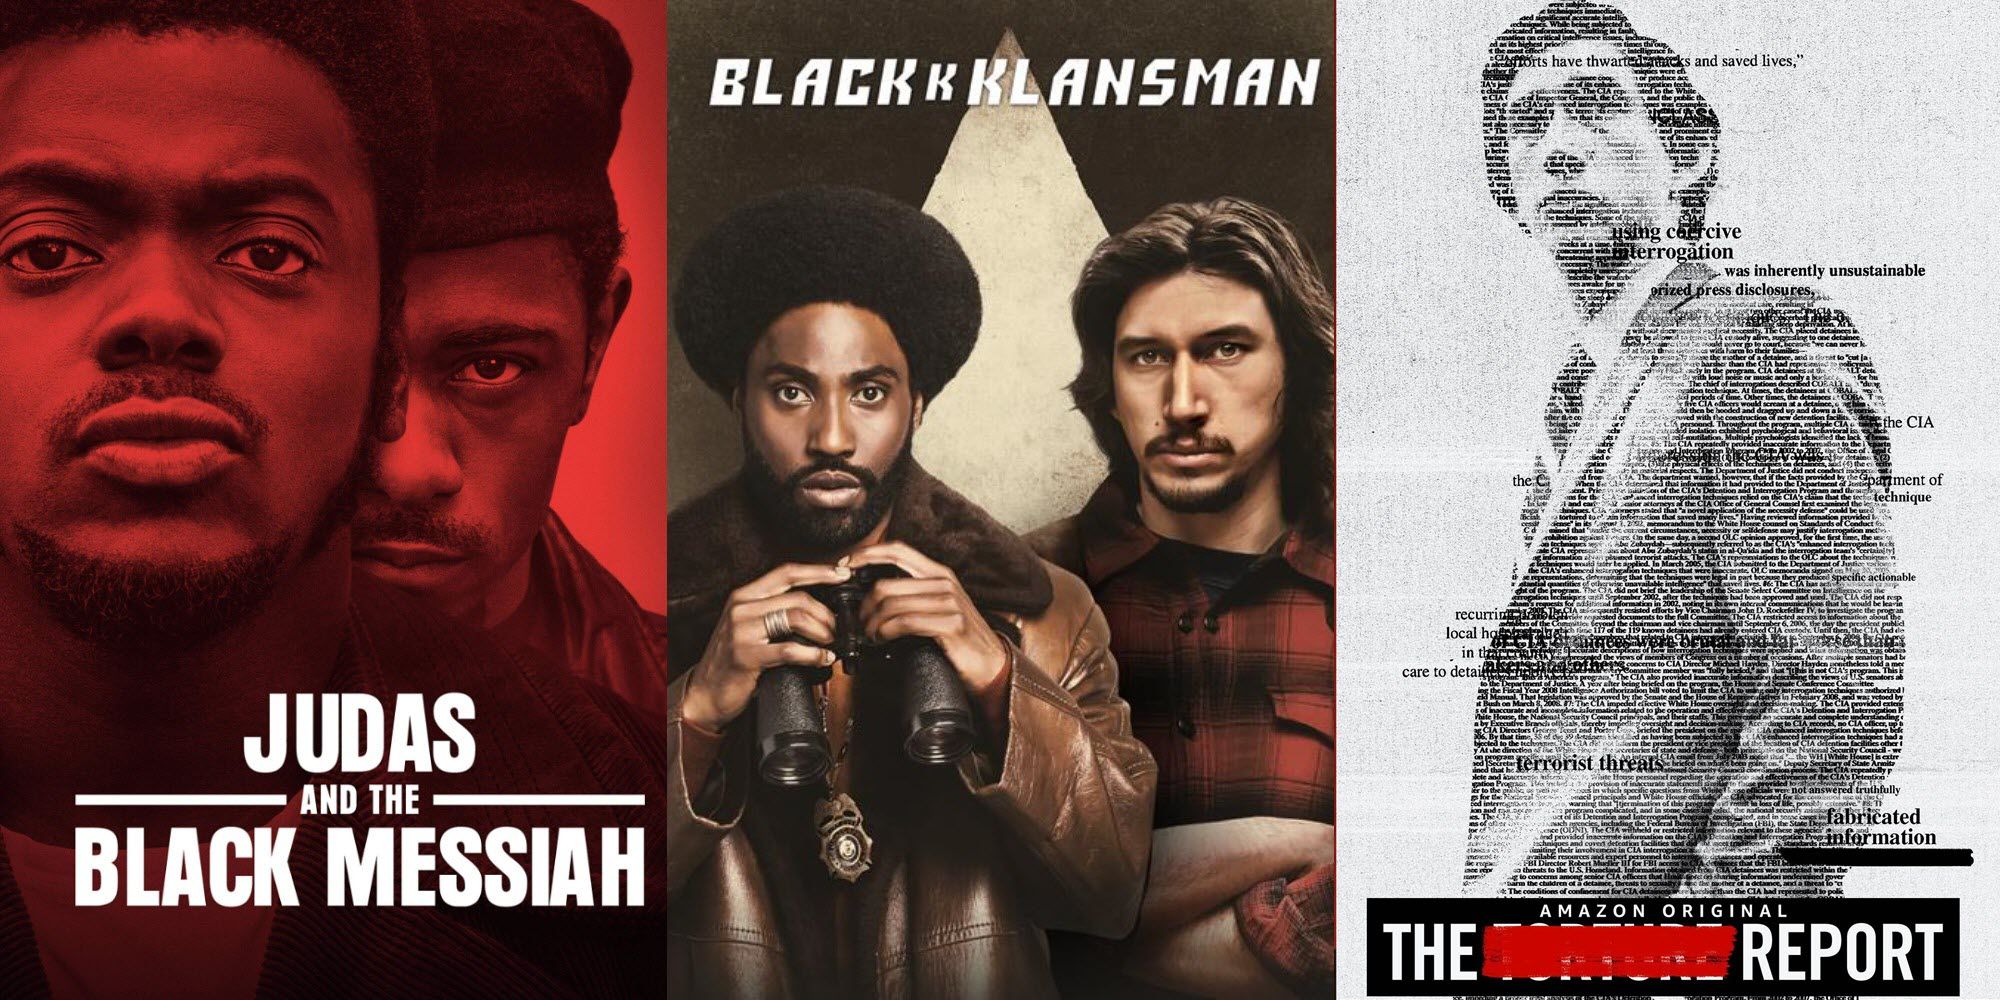 combined posters of the films The Report, BlacKkKlansman and Judas And The Black Messiah